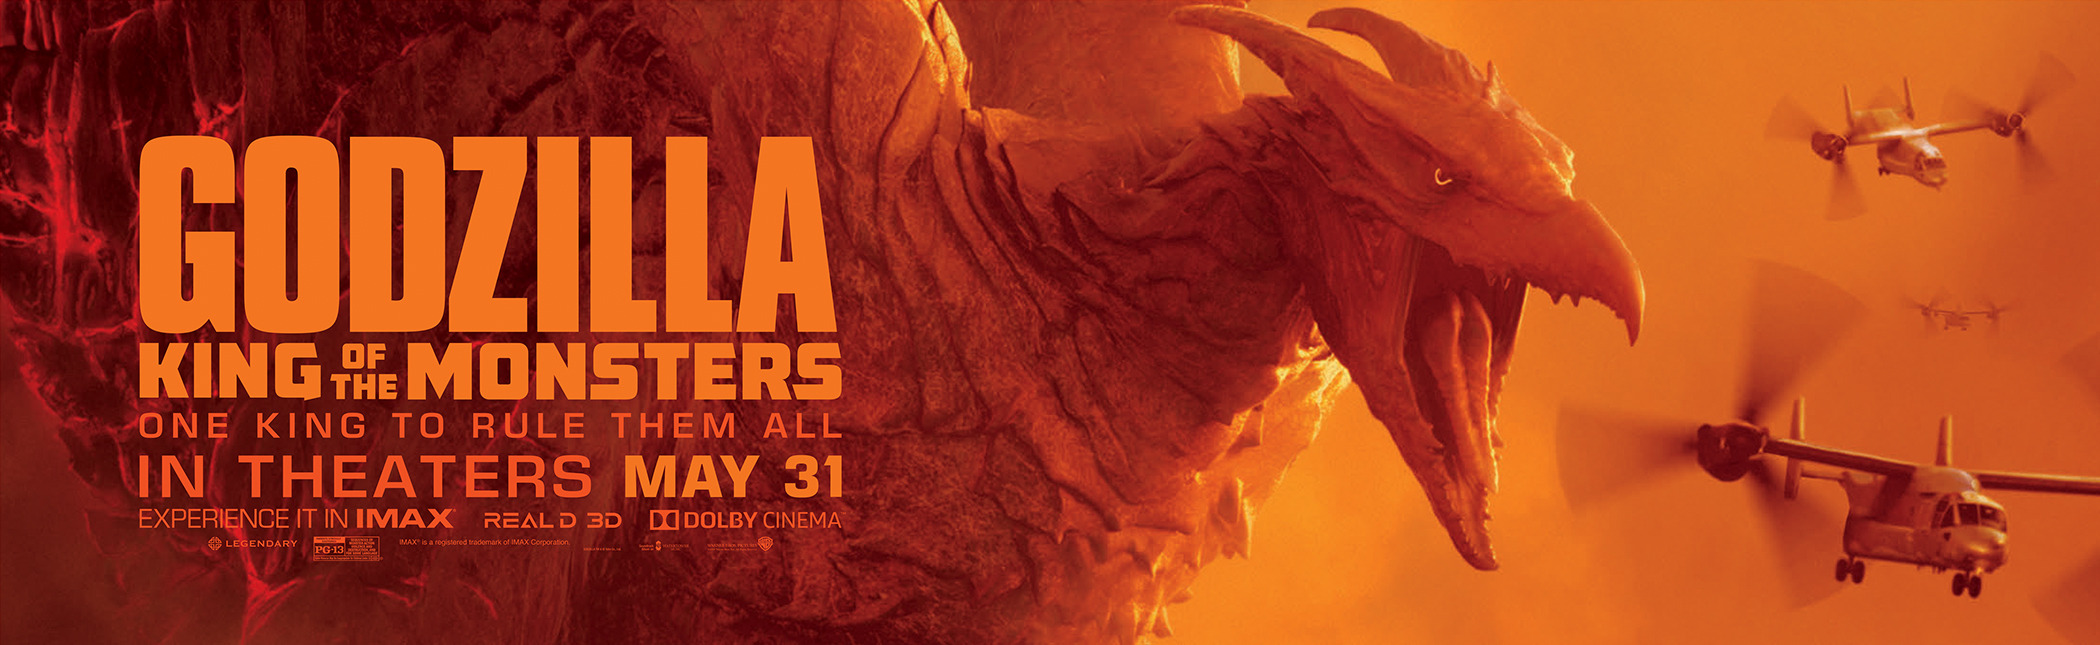 Mega Sized Movie Poster Image for Godzilla: King of the Monsters (#22 of 27)